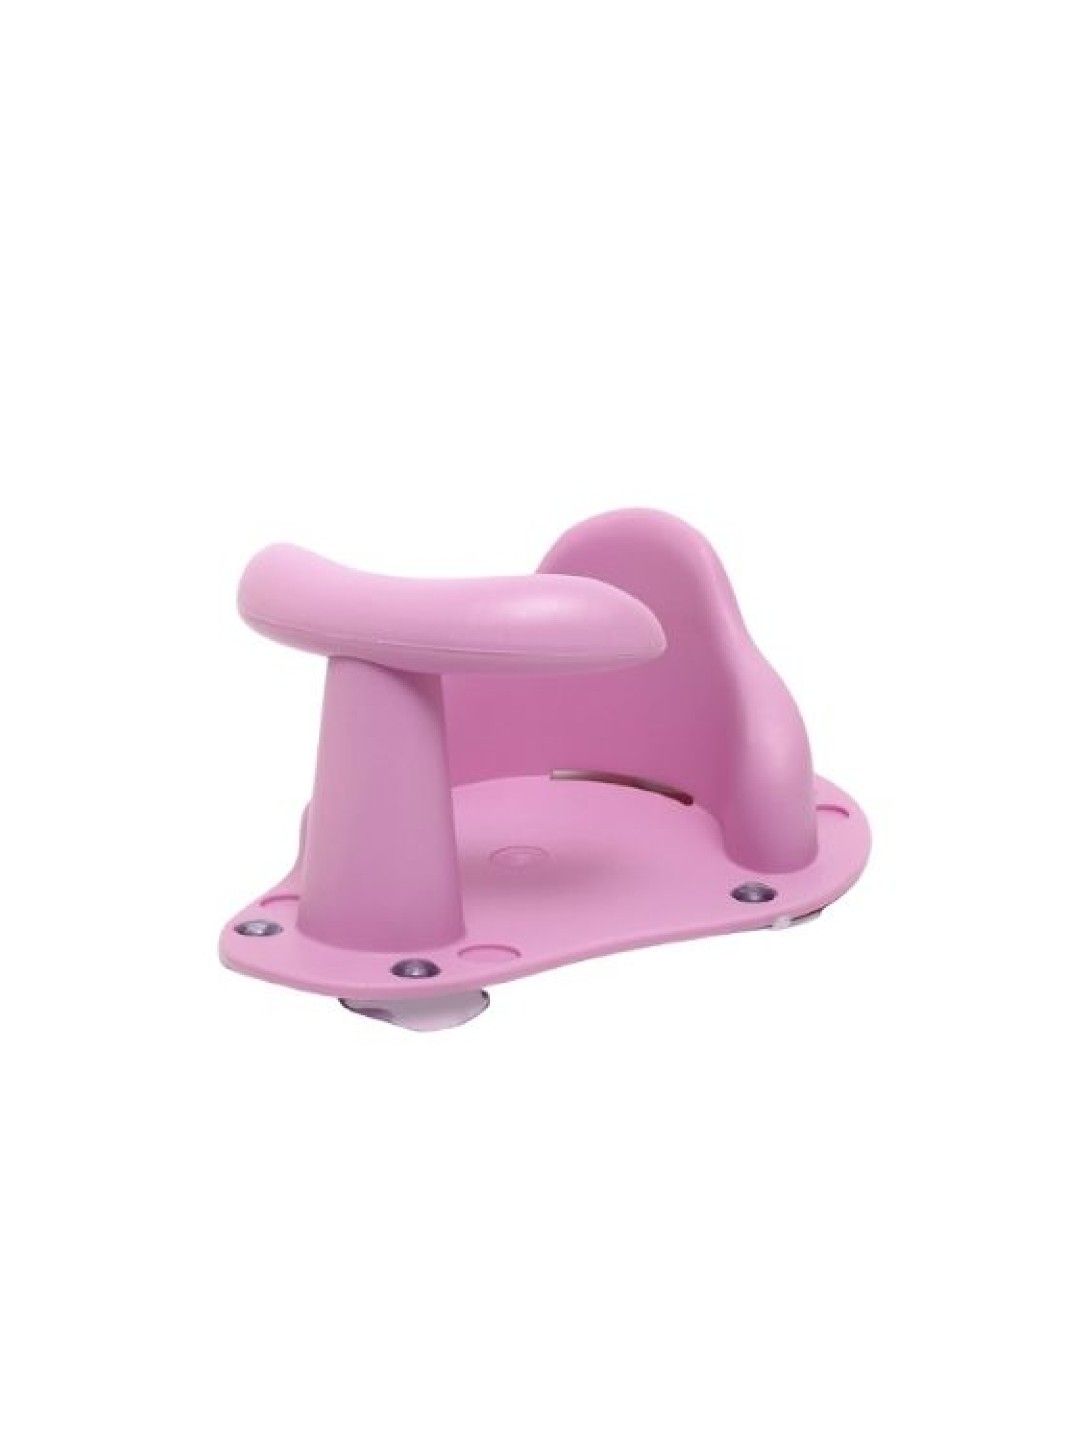 Coco Lala Baby Bath Seat Support